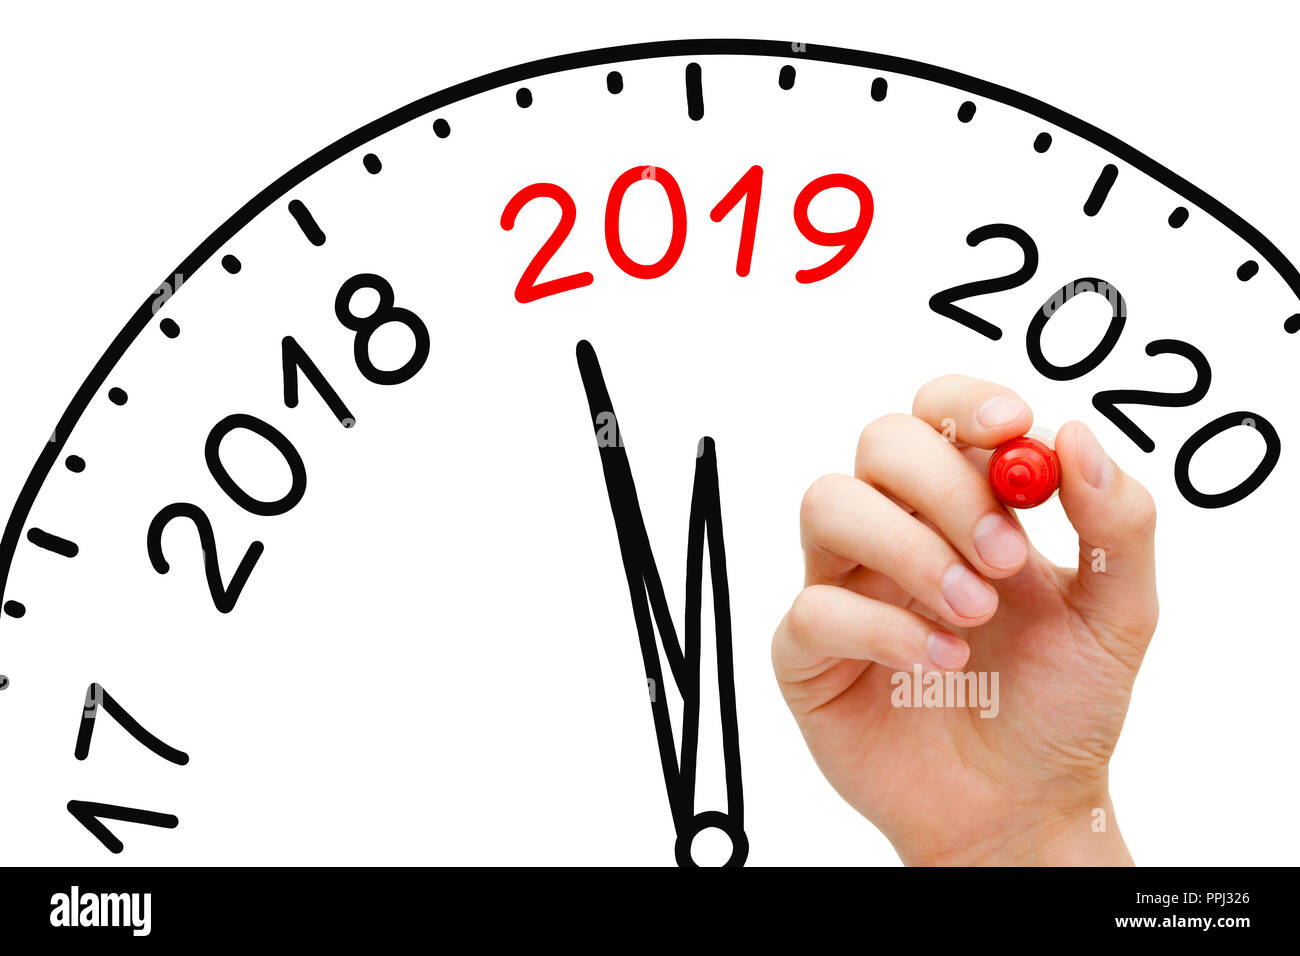 Hand drawing New Year 2019 clock concept with marker on transparent wipe board. Stock Photo